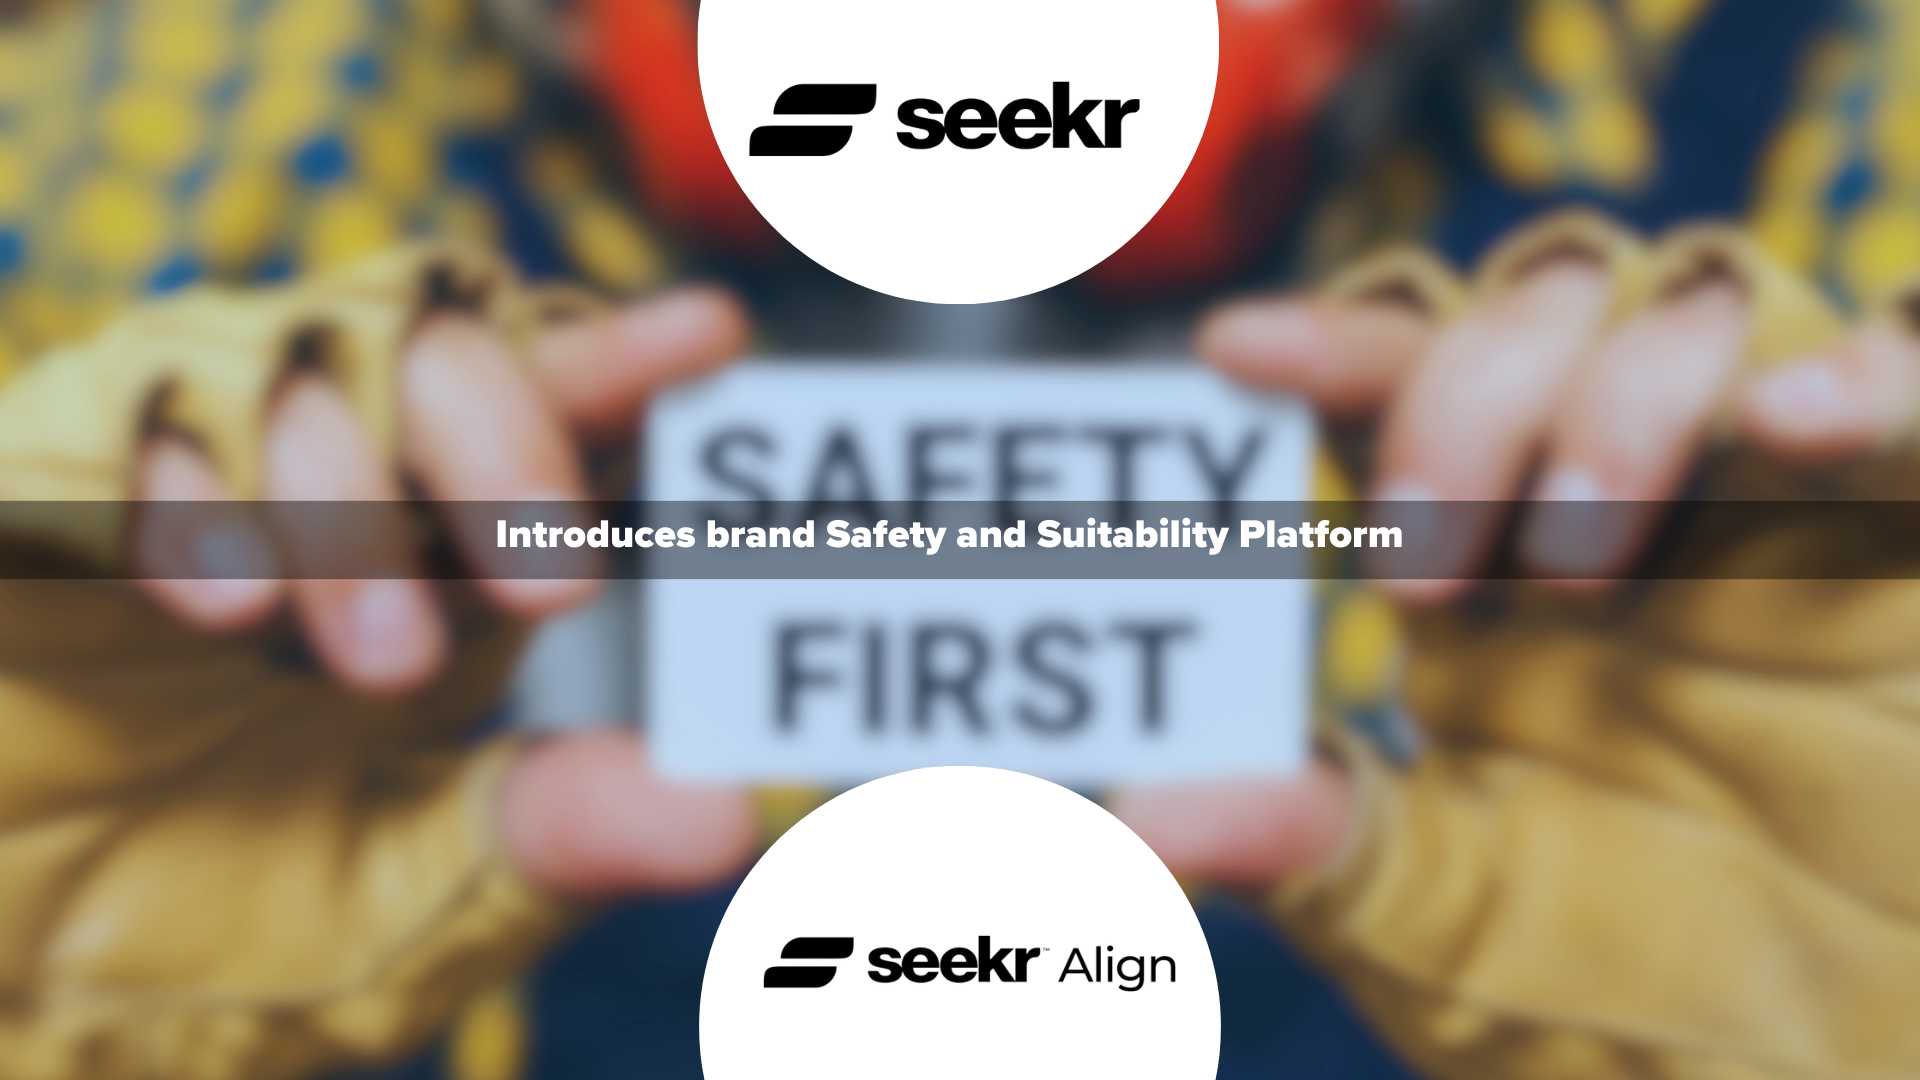 Seekr Introduces Align Brand Safety and Suitability Platform to Drive Doubling of Podcast Industry Beyond $4 Billion in 24 Months